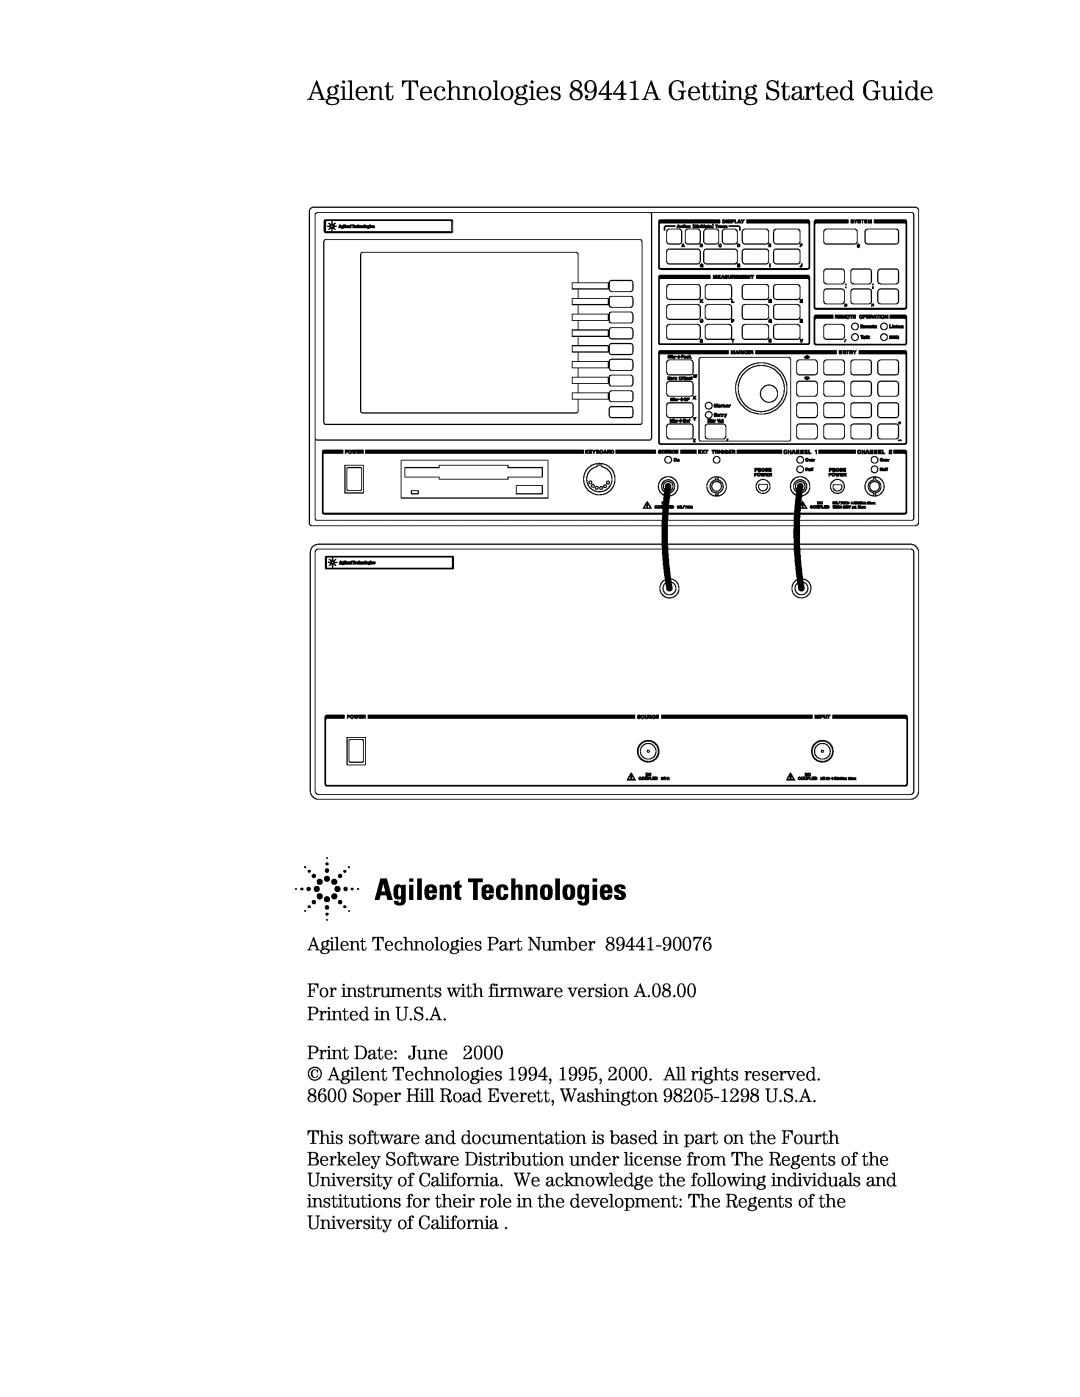 Agilent Technologies manual Agilent Technologies 89441A Getting Started Guide 